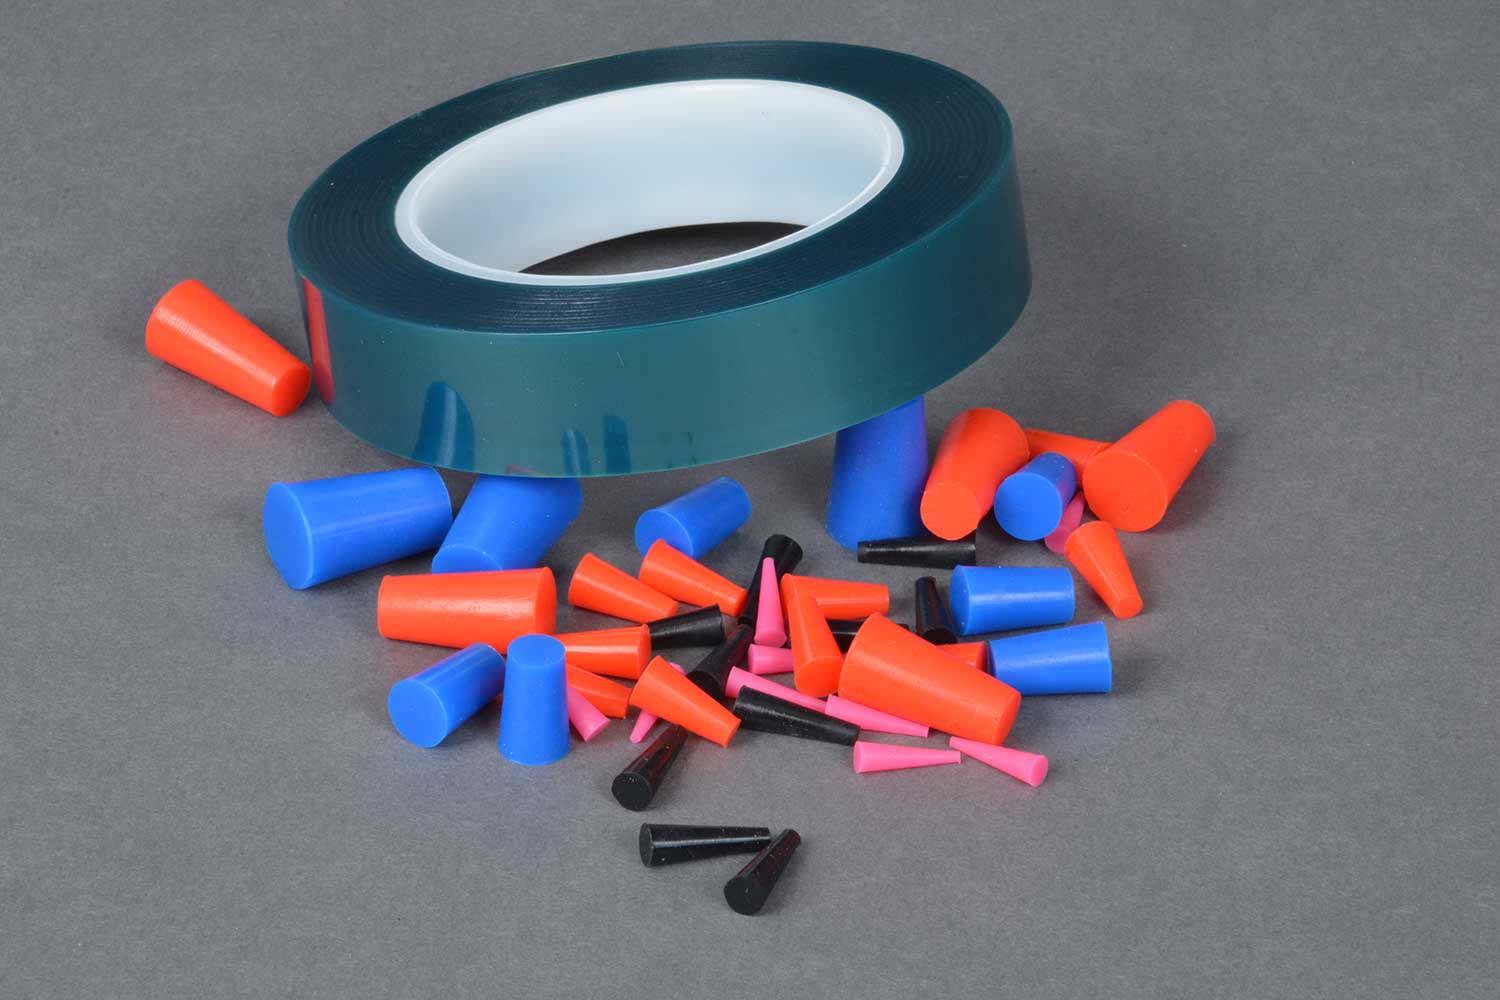 A roll of black, heat-resistant tape.